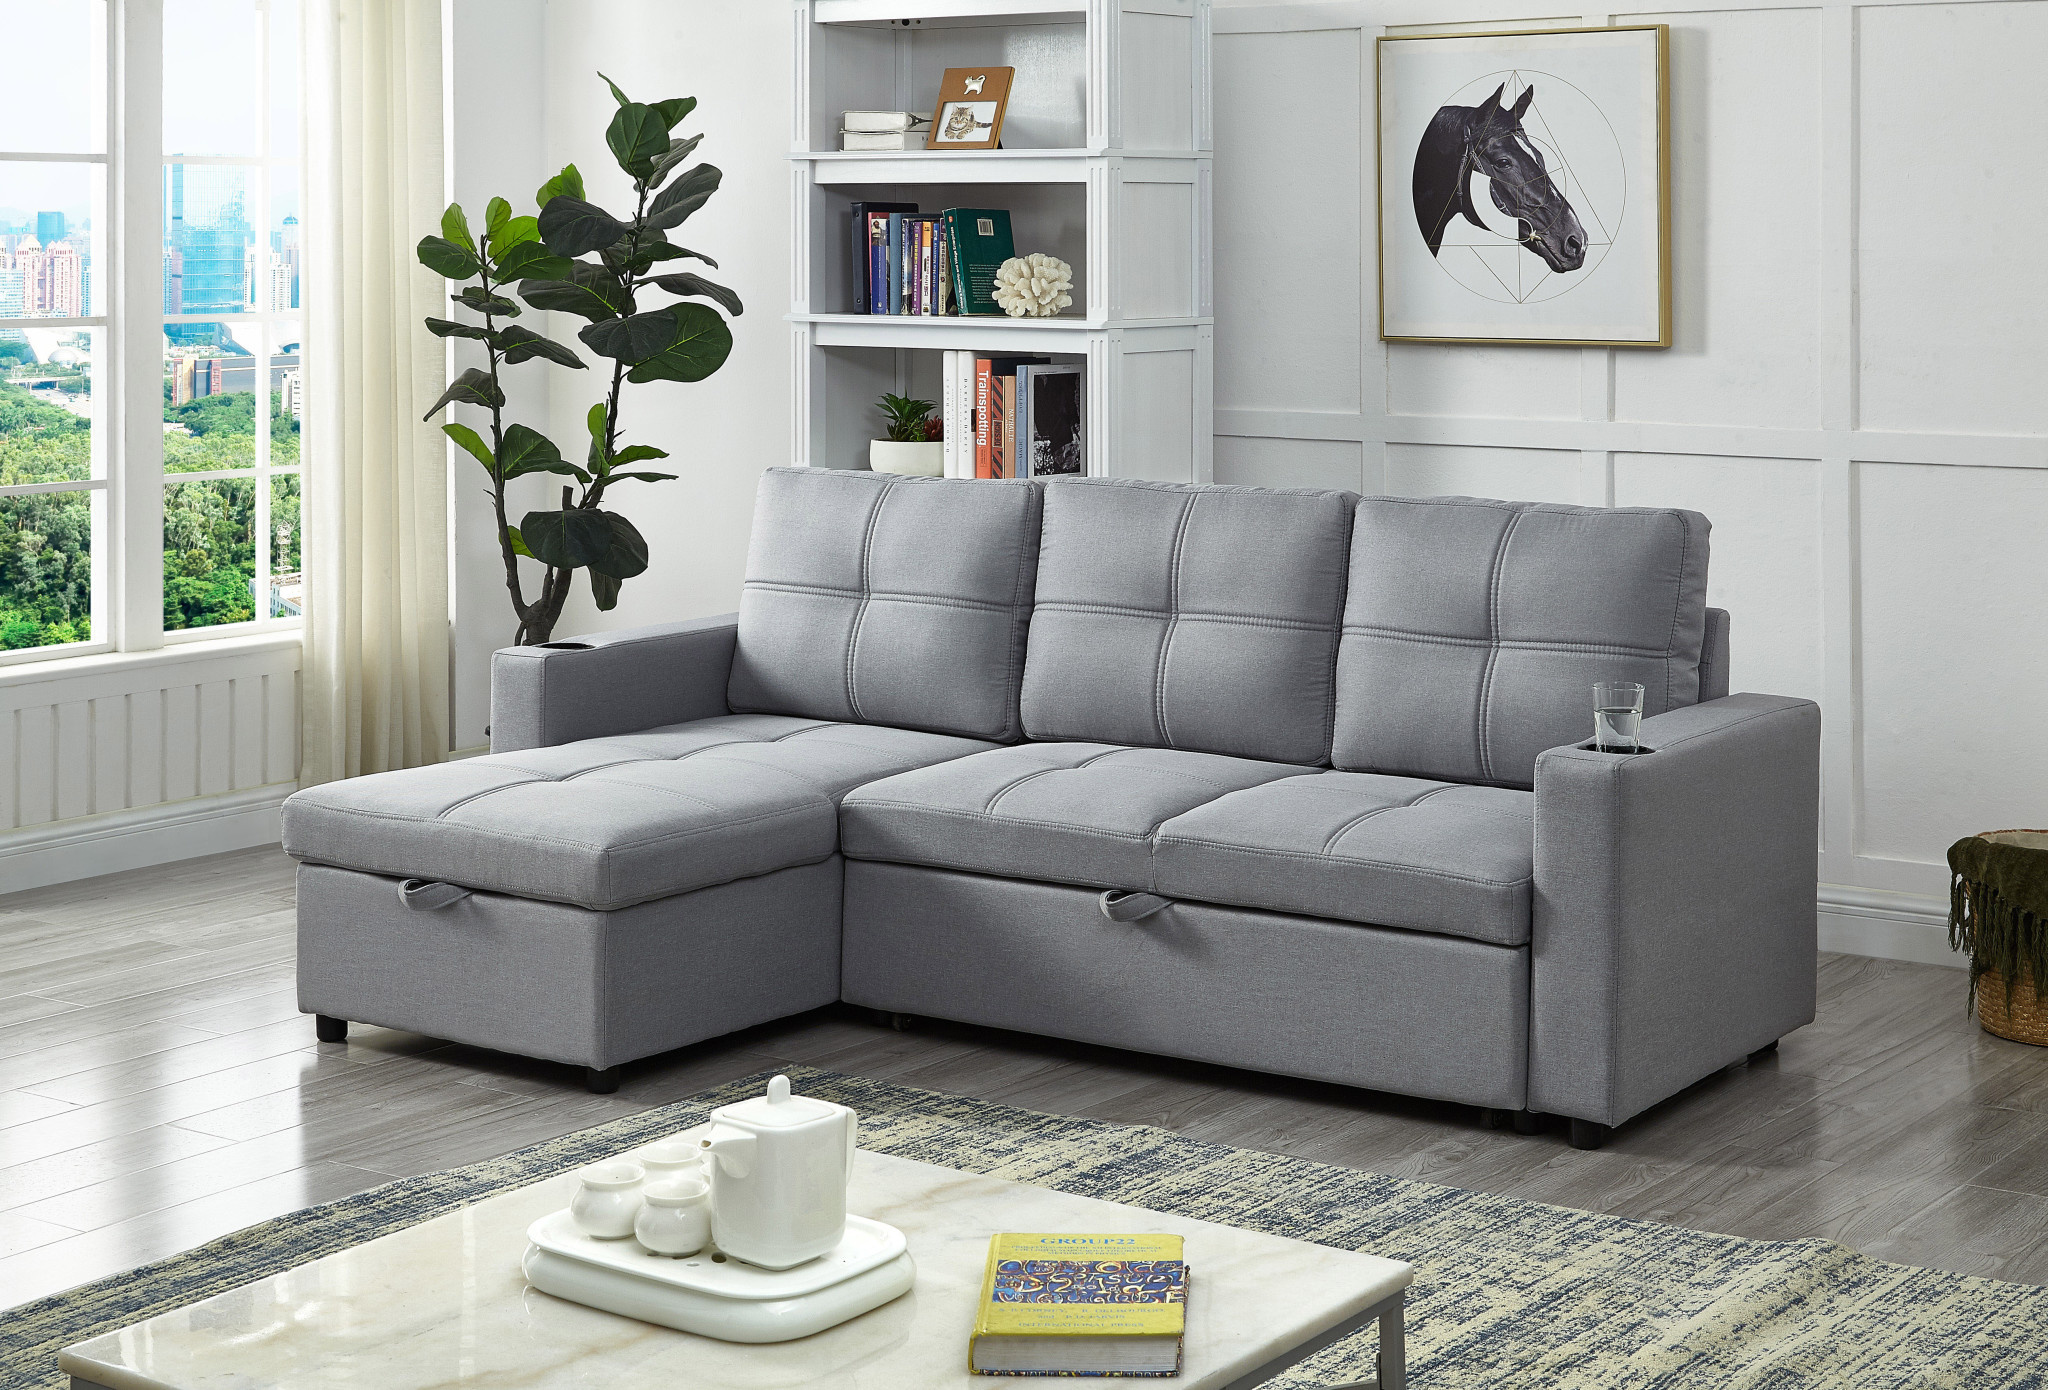 restaurant sectional sofa bed